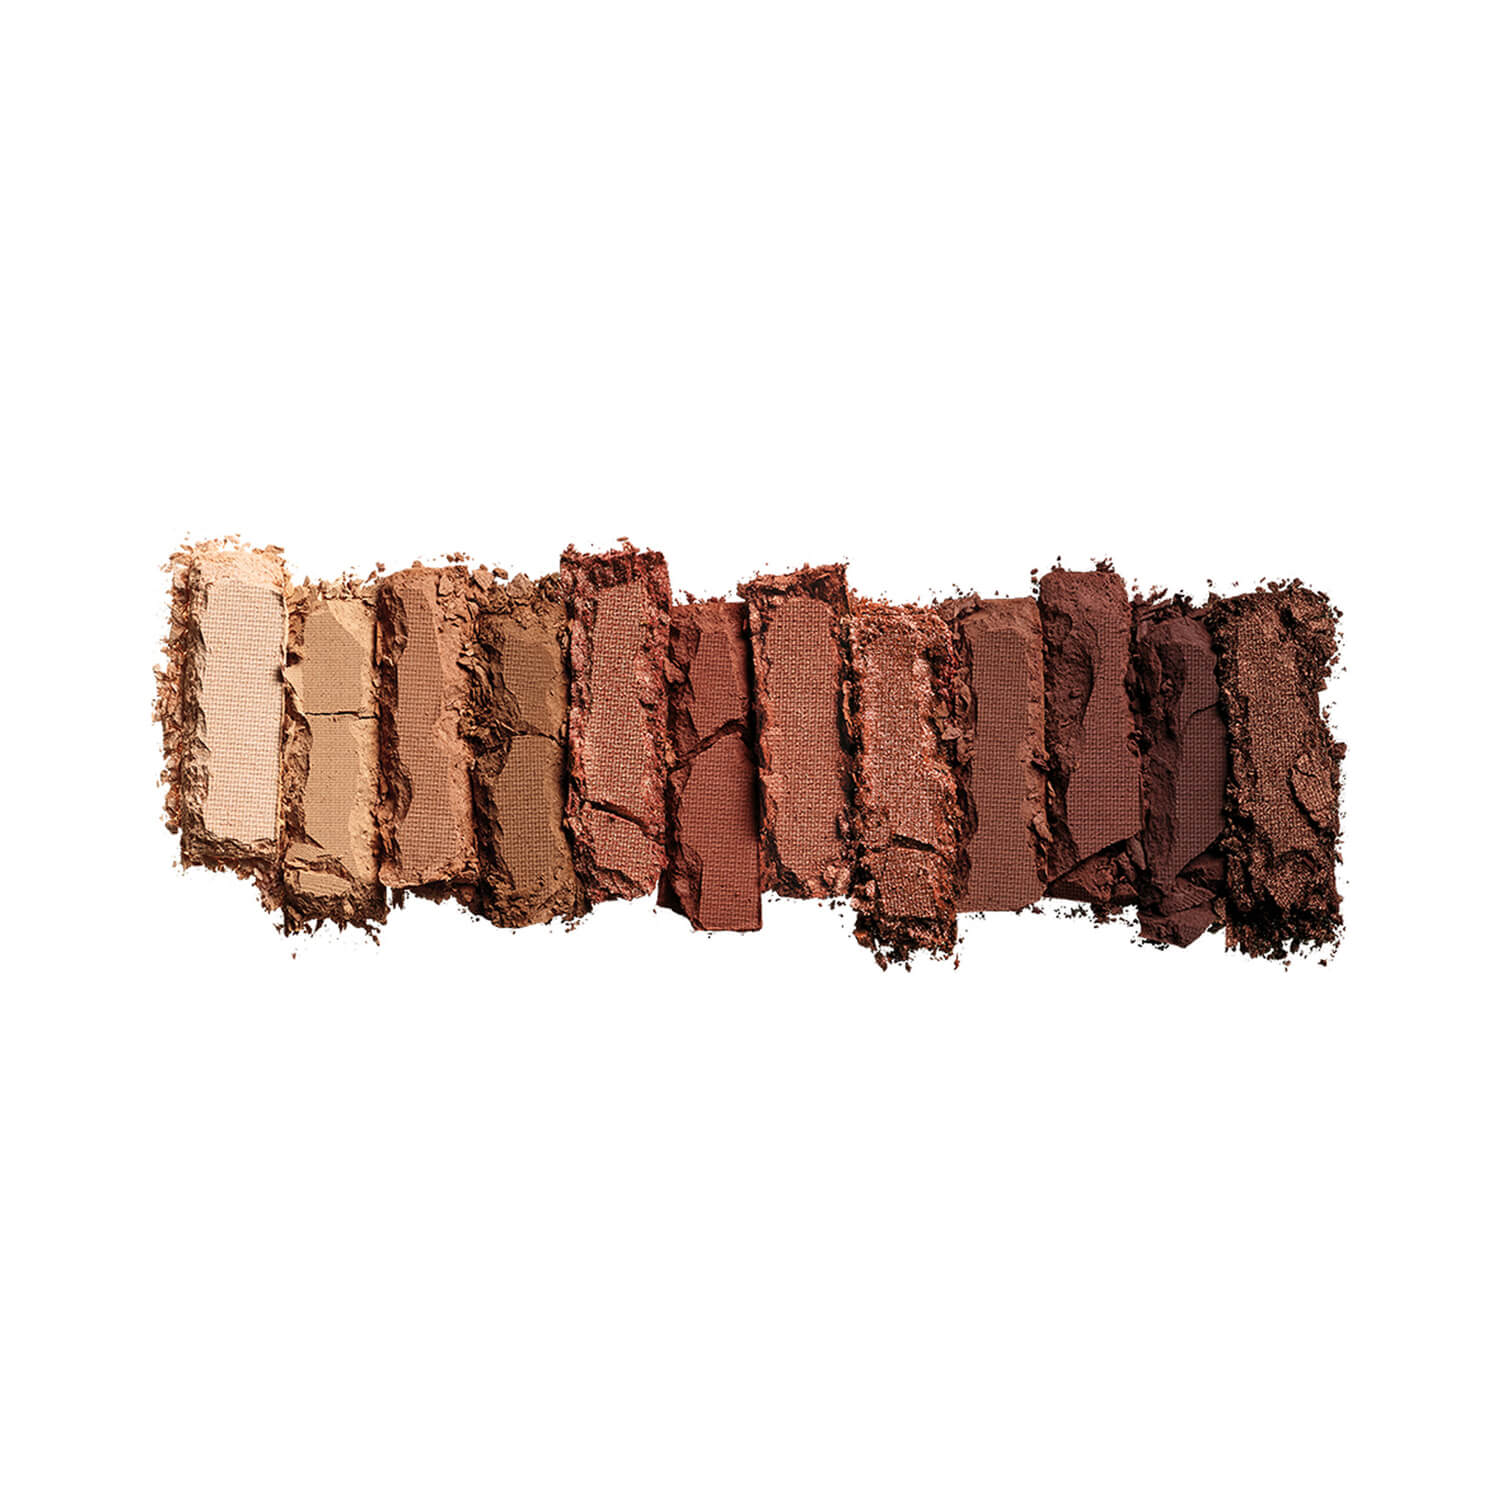 Urban Decay Naked Heat Eyeshadow Palette Swatches